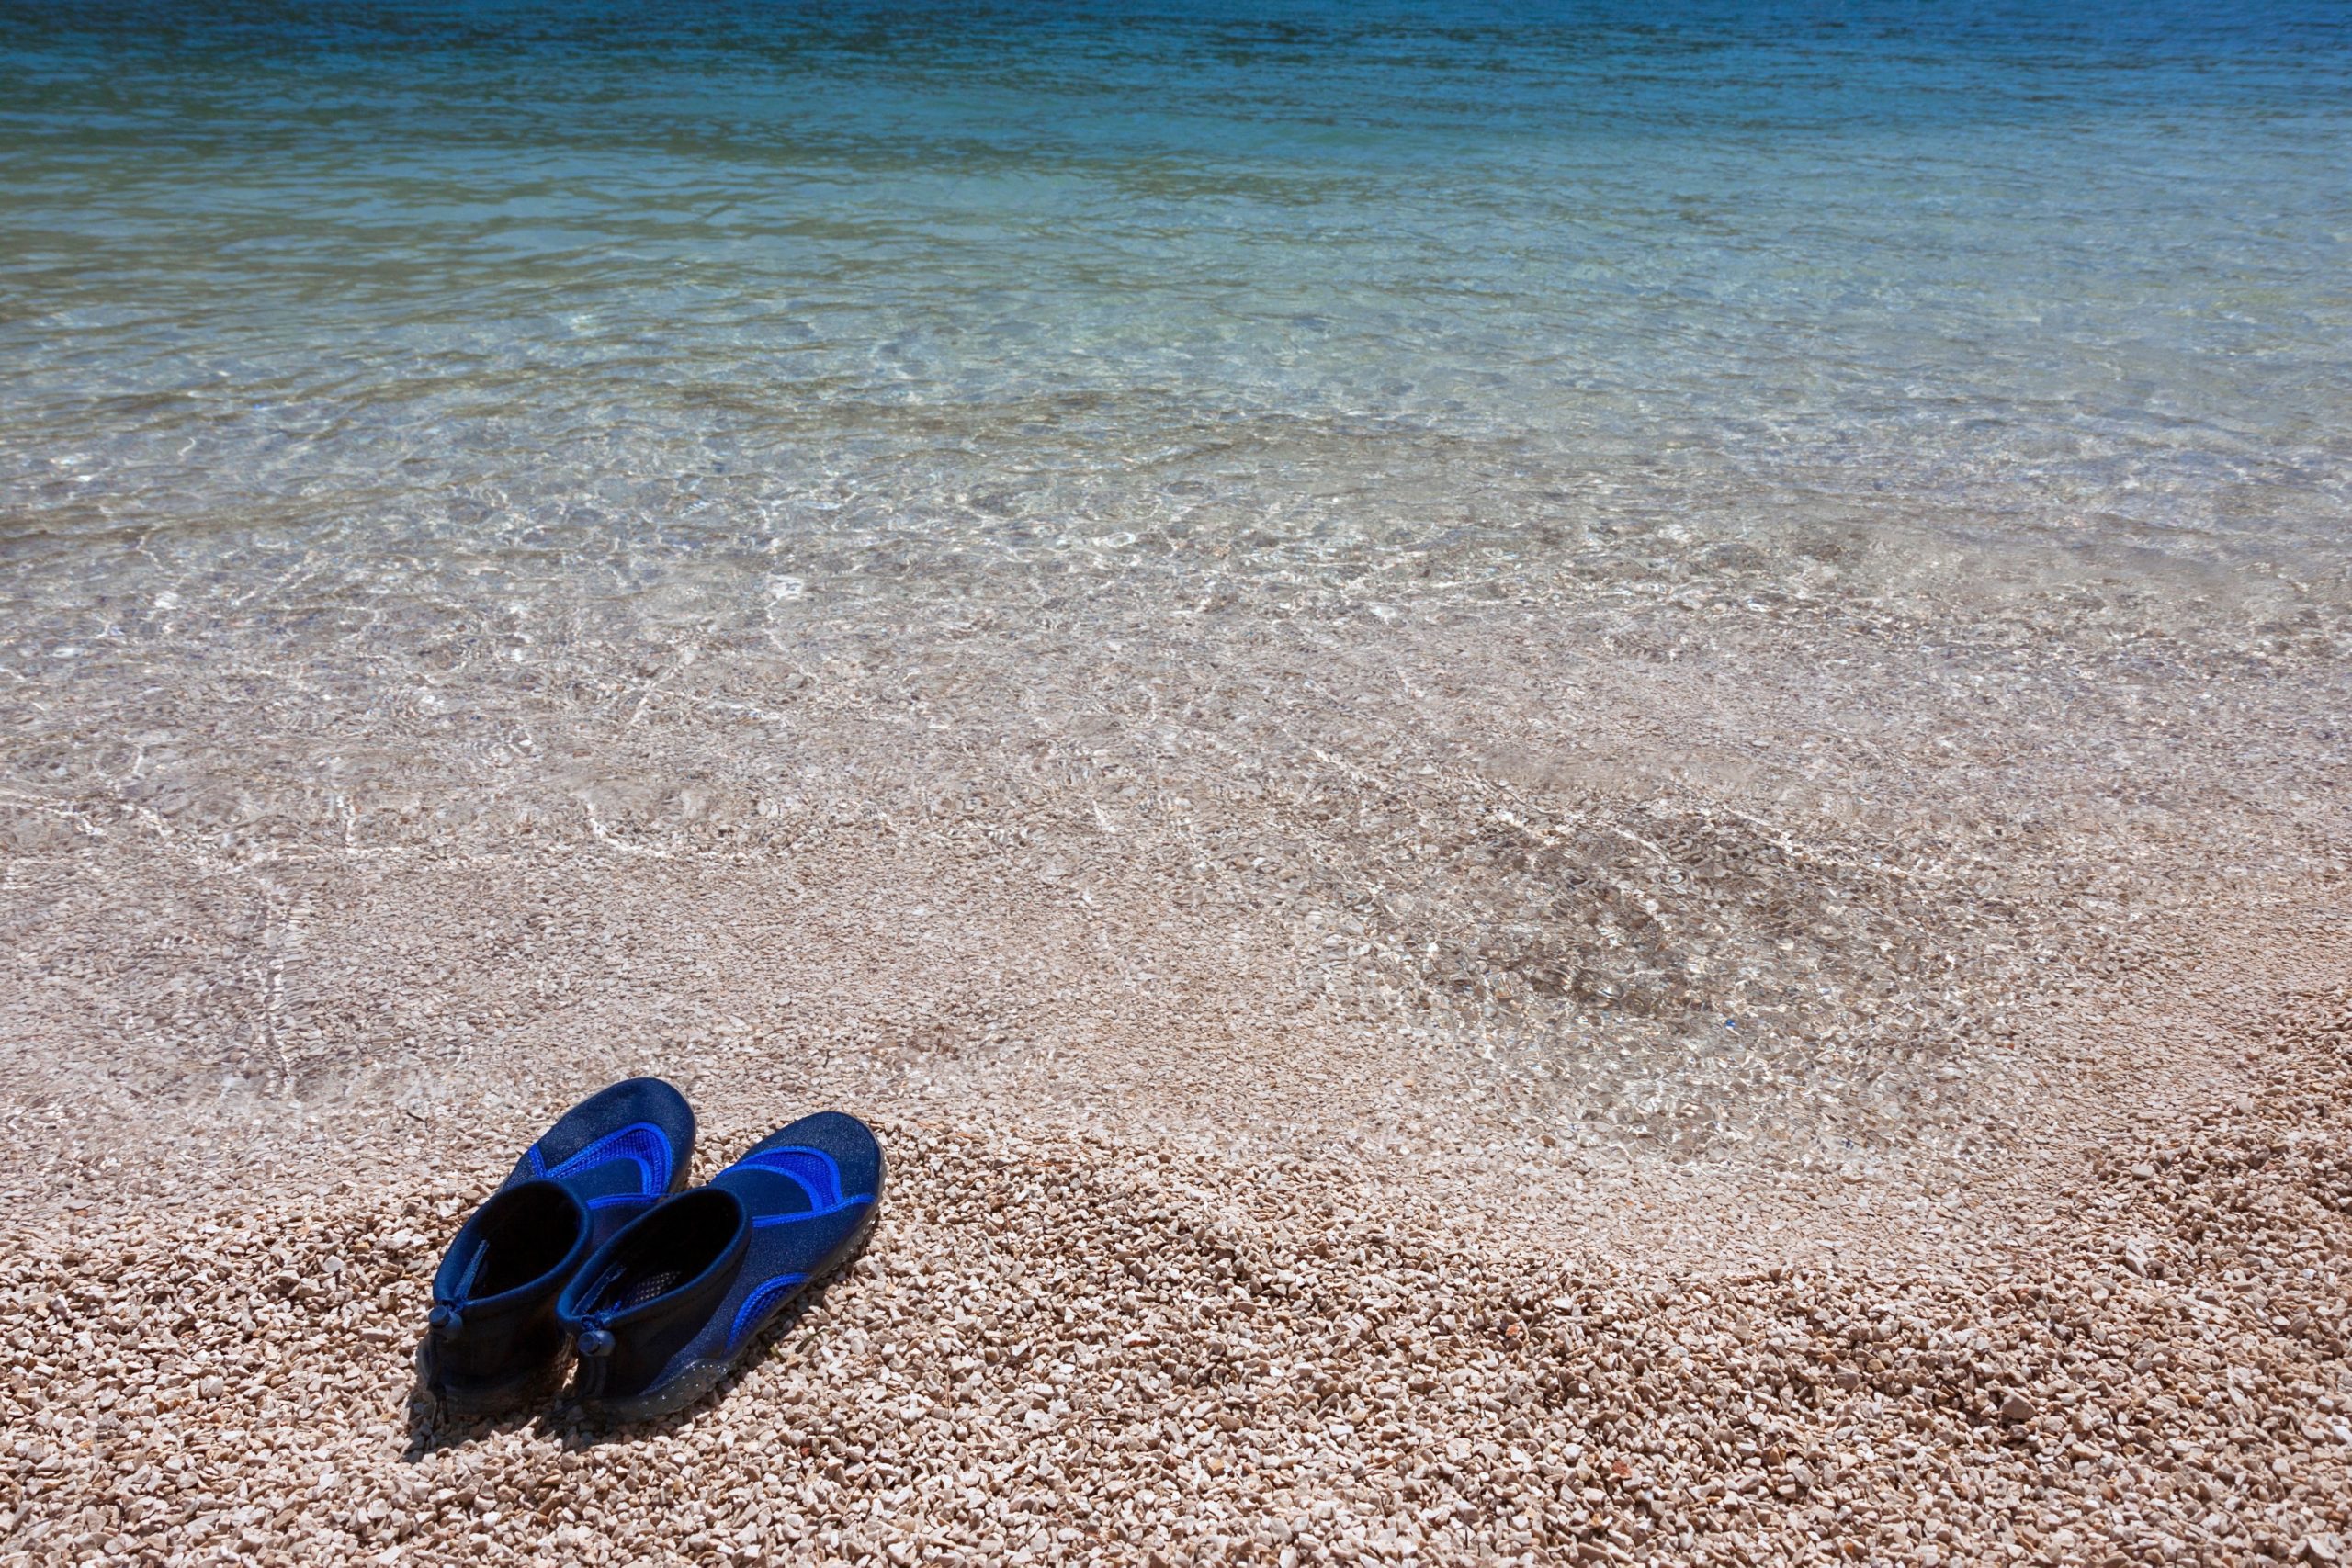 Swimming shoes are what to pack for a beach day in Hawaii